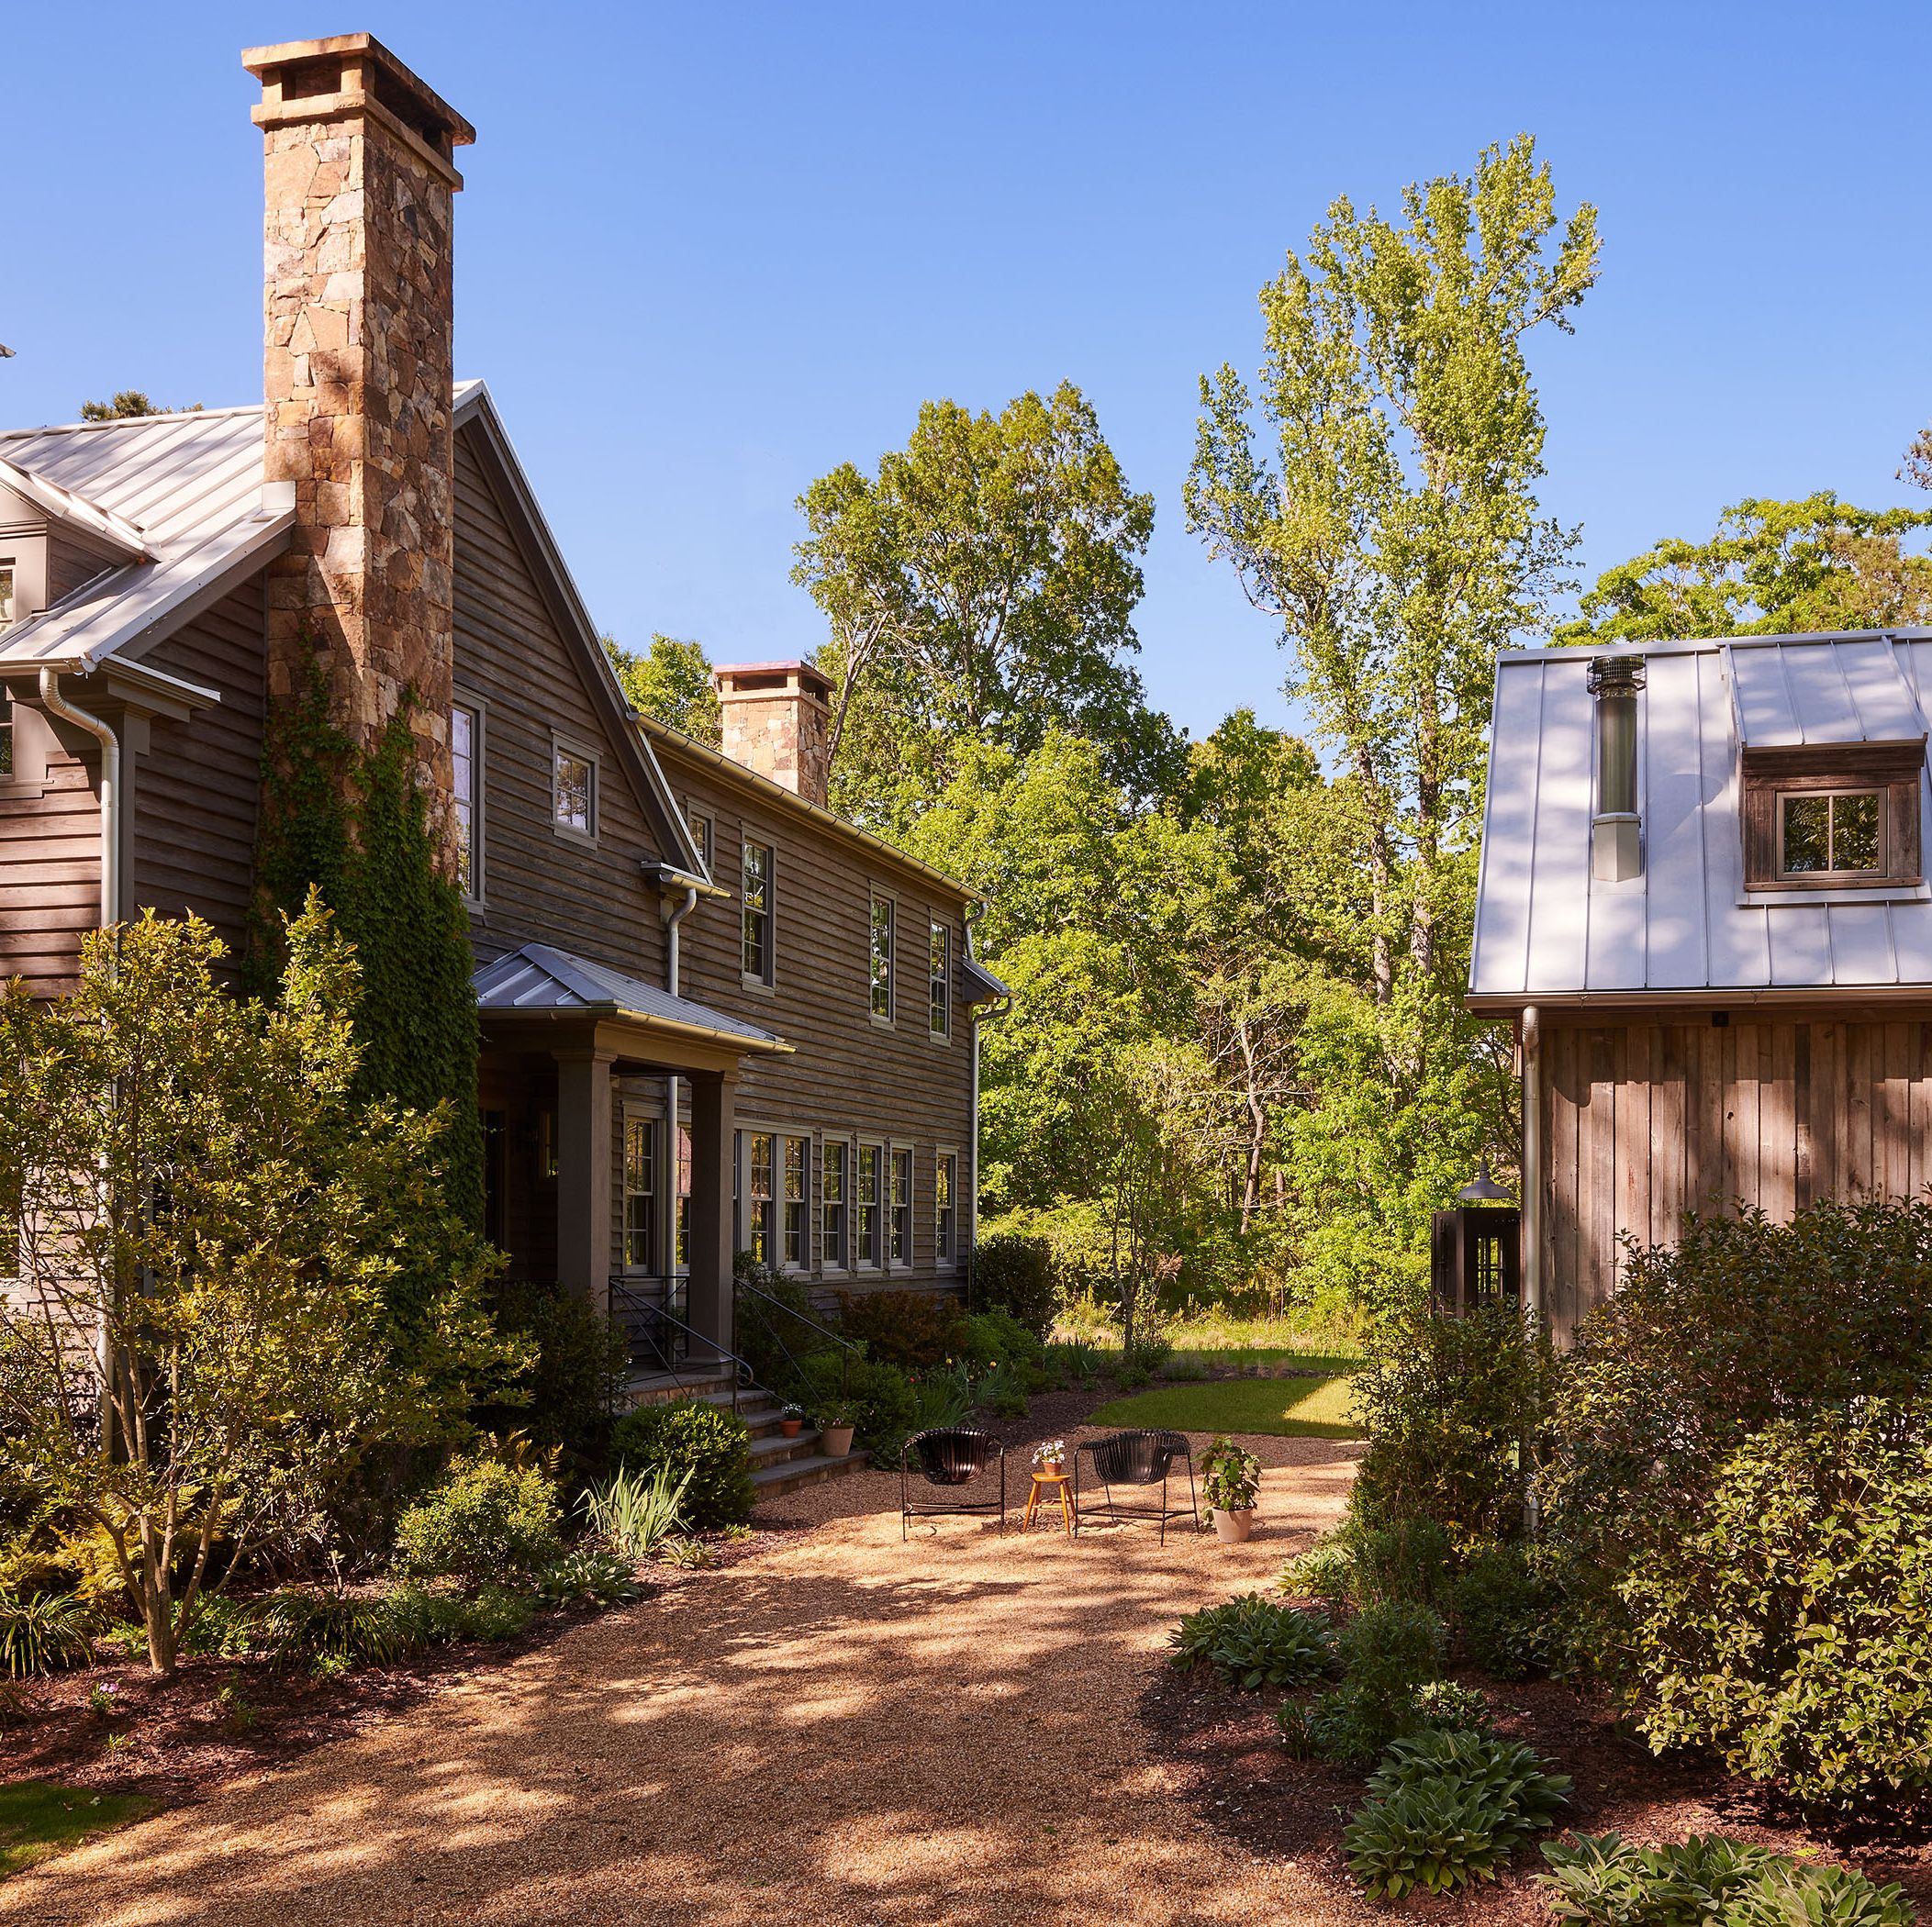 Step Inside This Swoon-Worthy Southern Farmhouse Filled with Local Art and Antiques